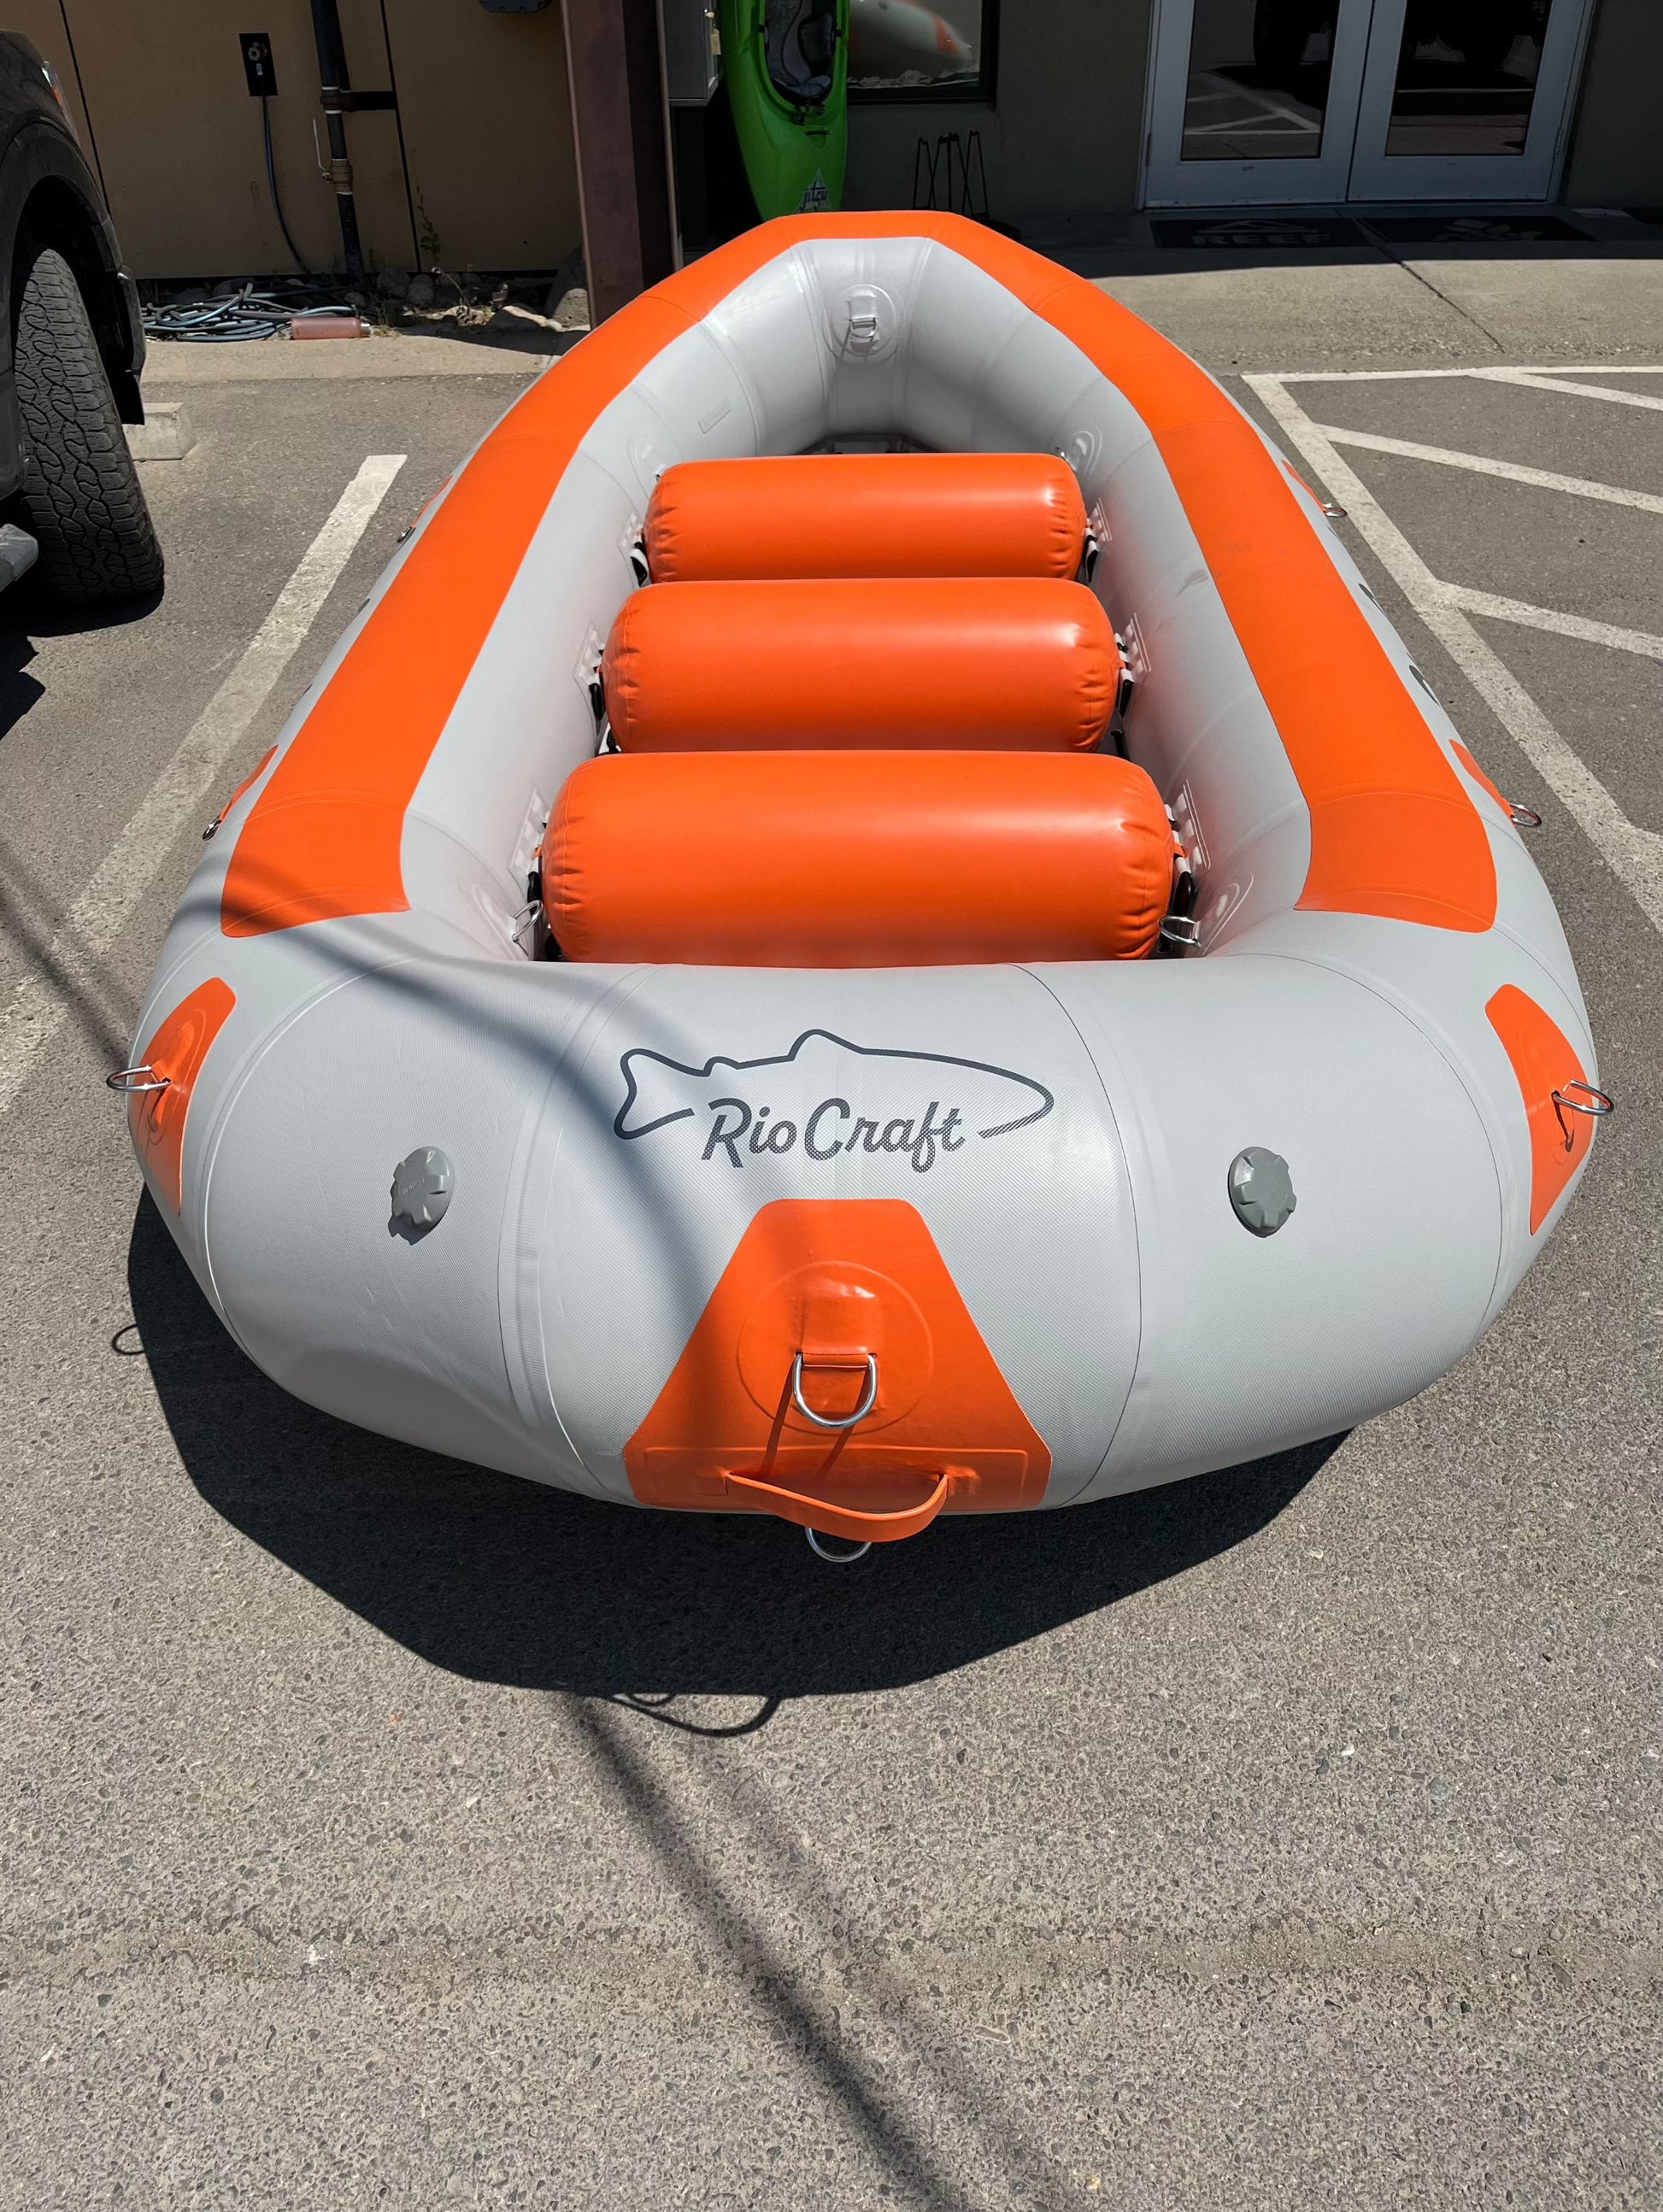 A Rio Craft Consignment 13' Colorado raft parked in a parking lot.